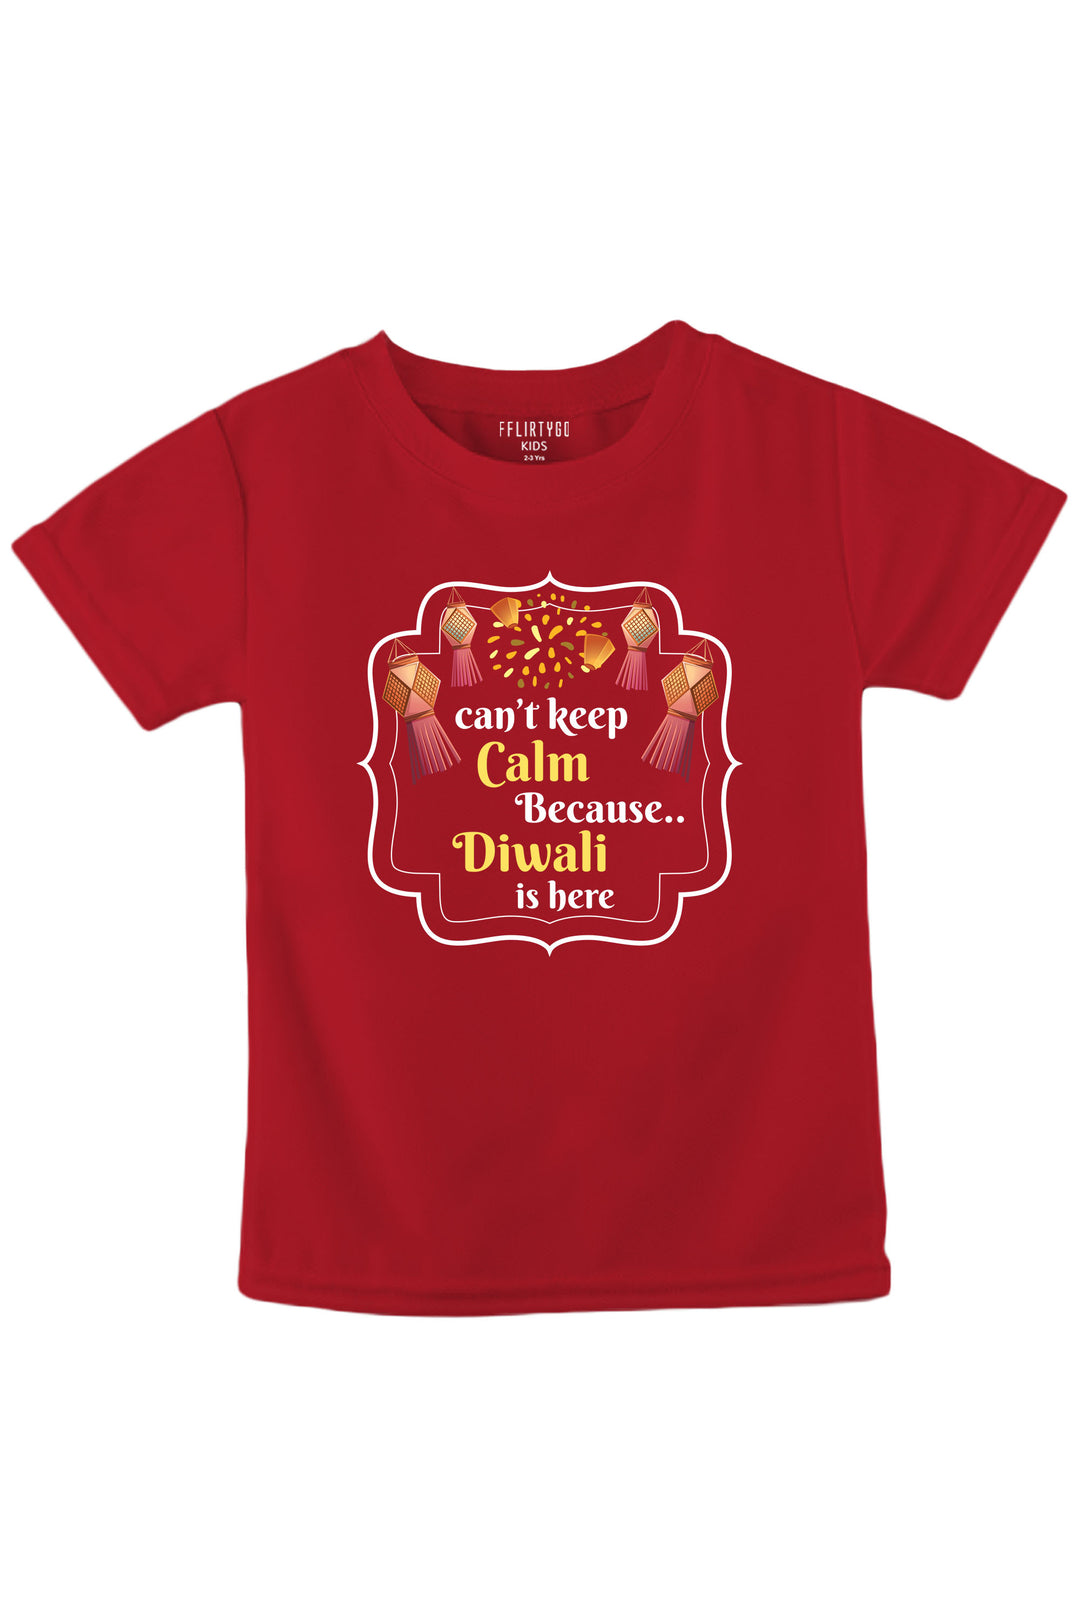 Can't Keep Calm Because Diwali Is Here Kids T Shirt